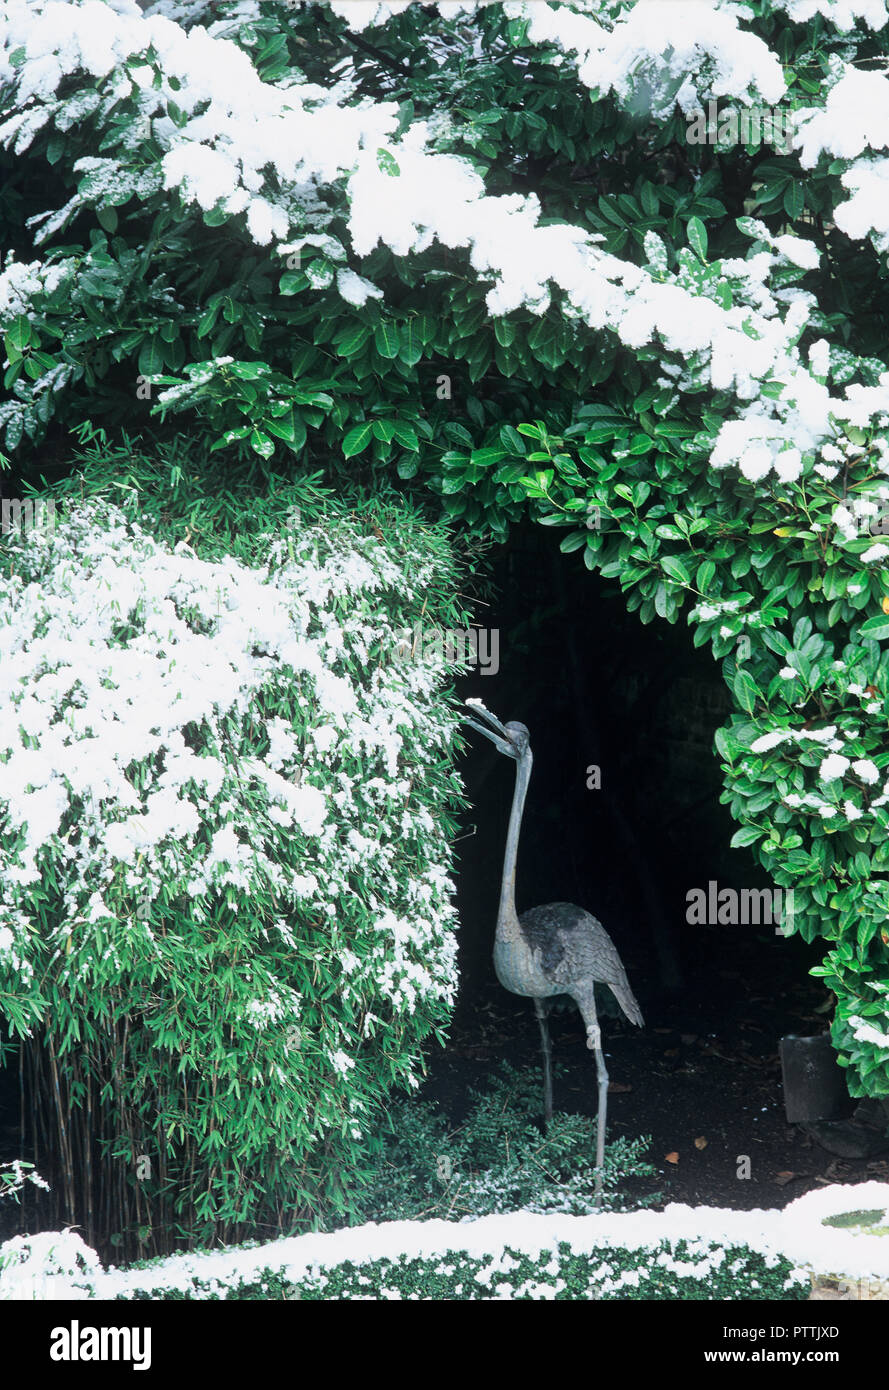 Bird statue sheltering in bower in Lord Snowdon's garden Stock Photo